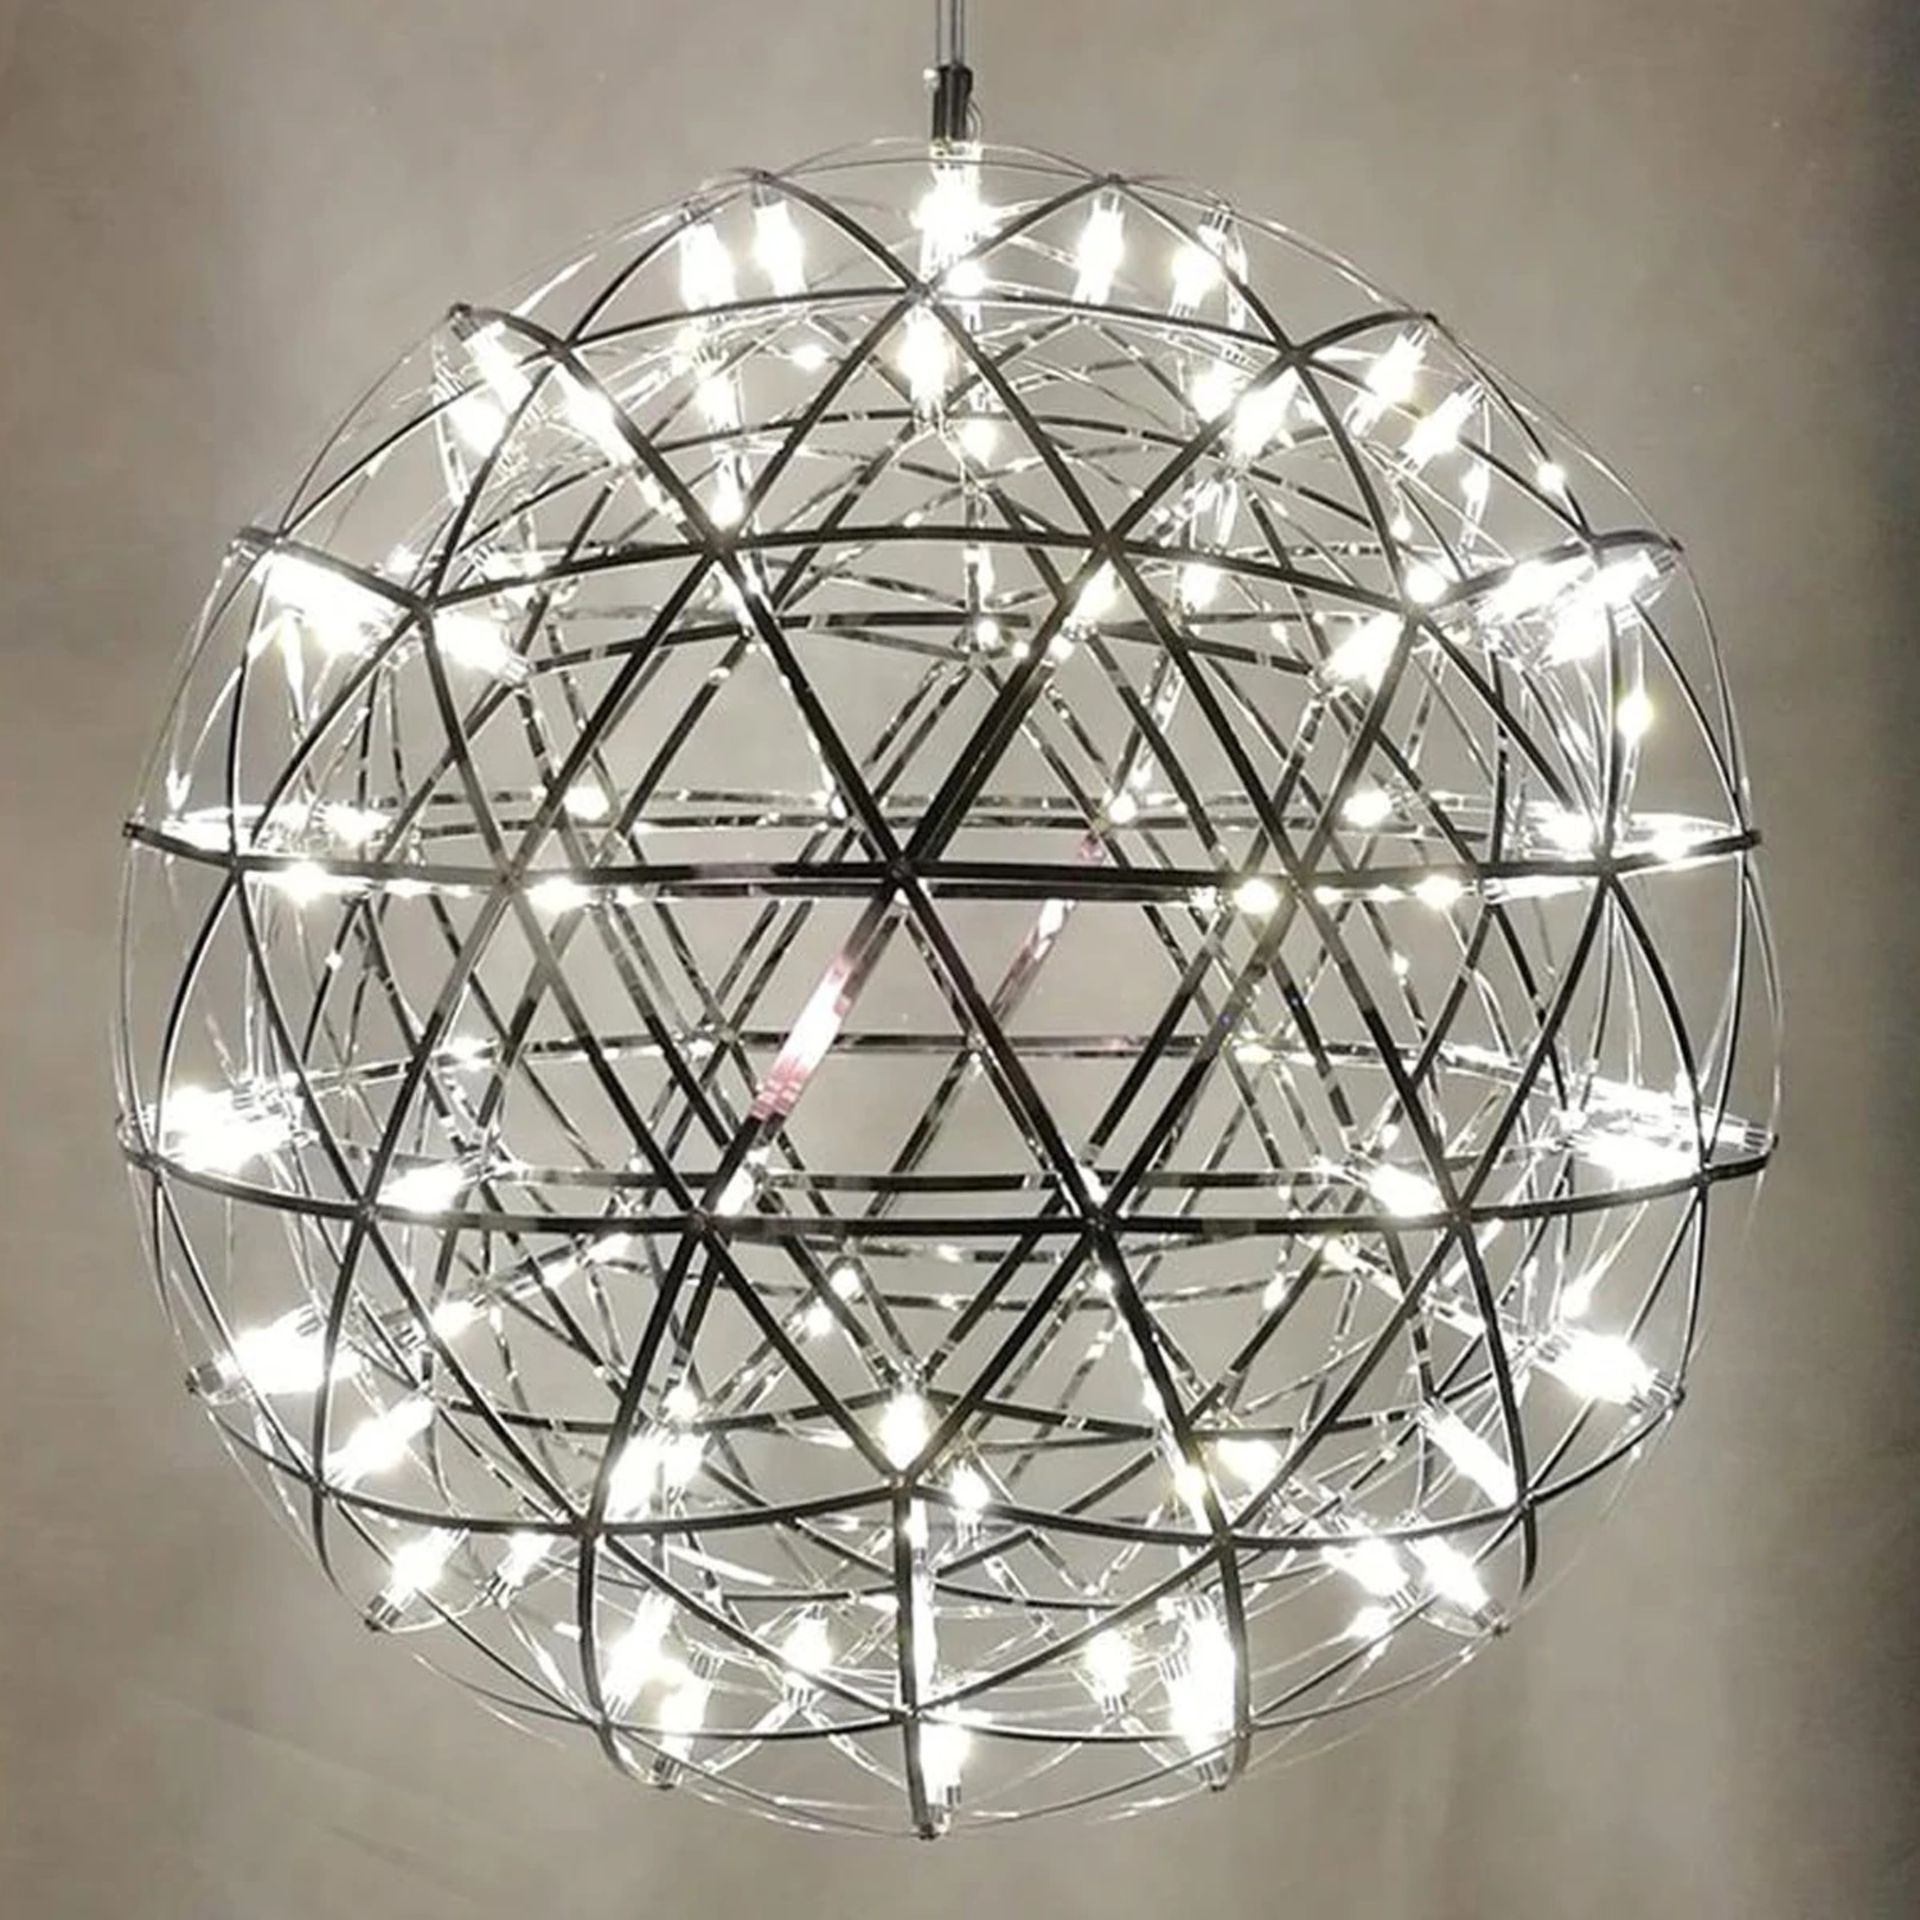 Starburst chrome spherical striking pendant 100cm x 212 pieces silver starburst light with its - Image 2 of 3